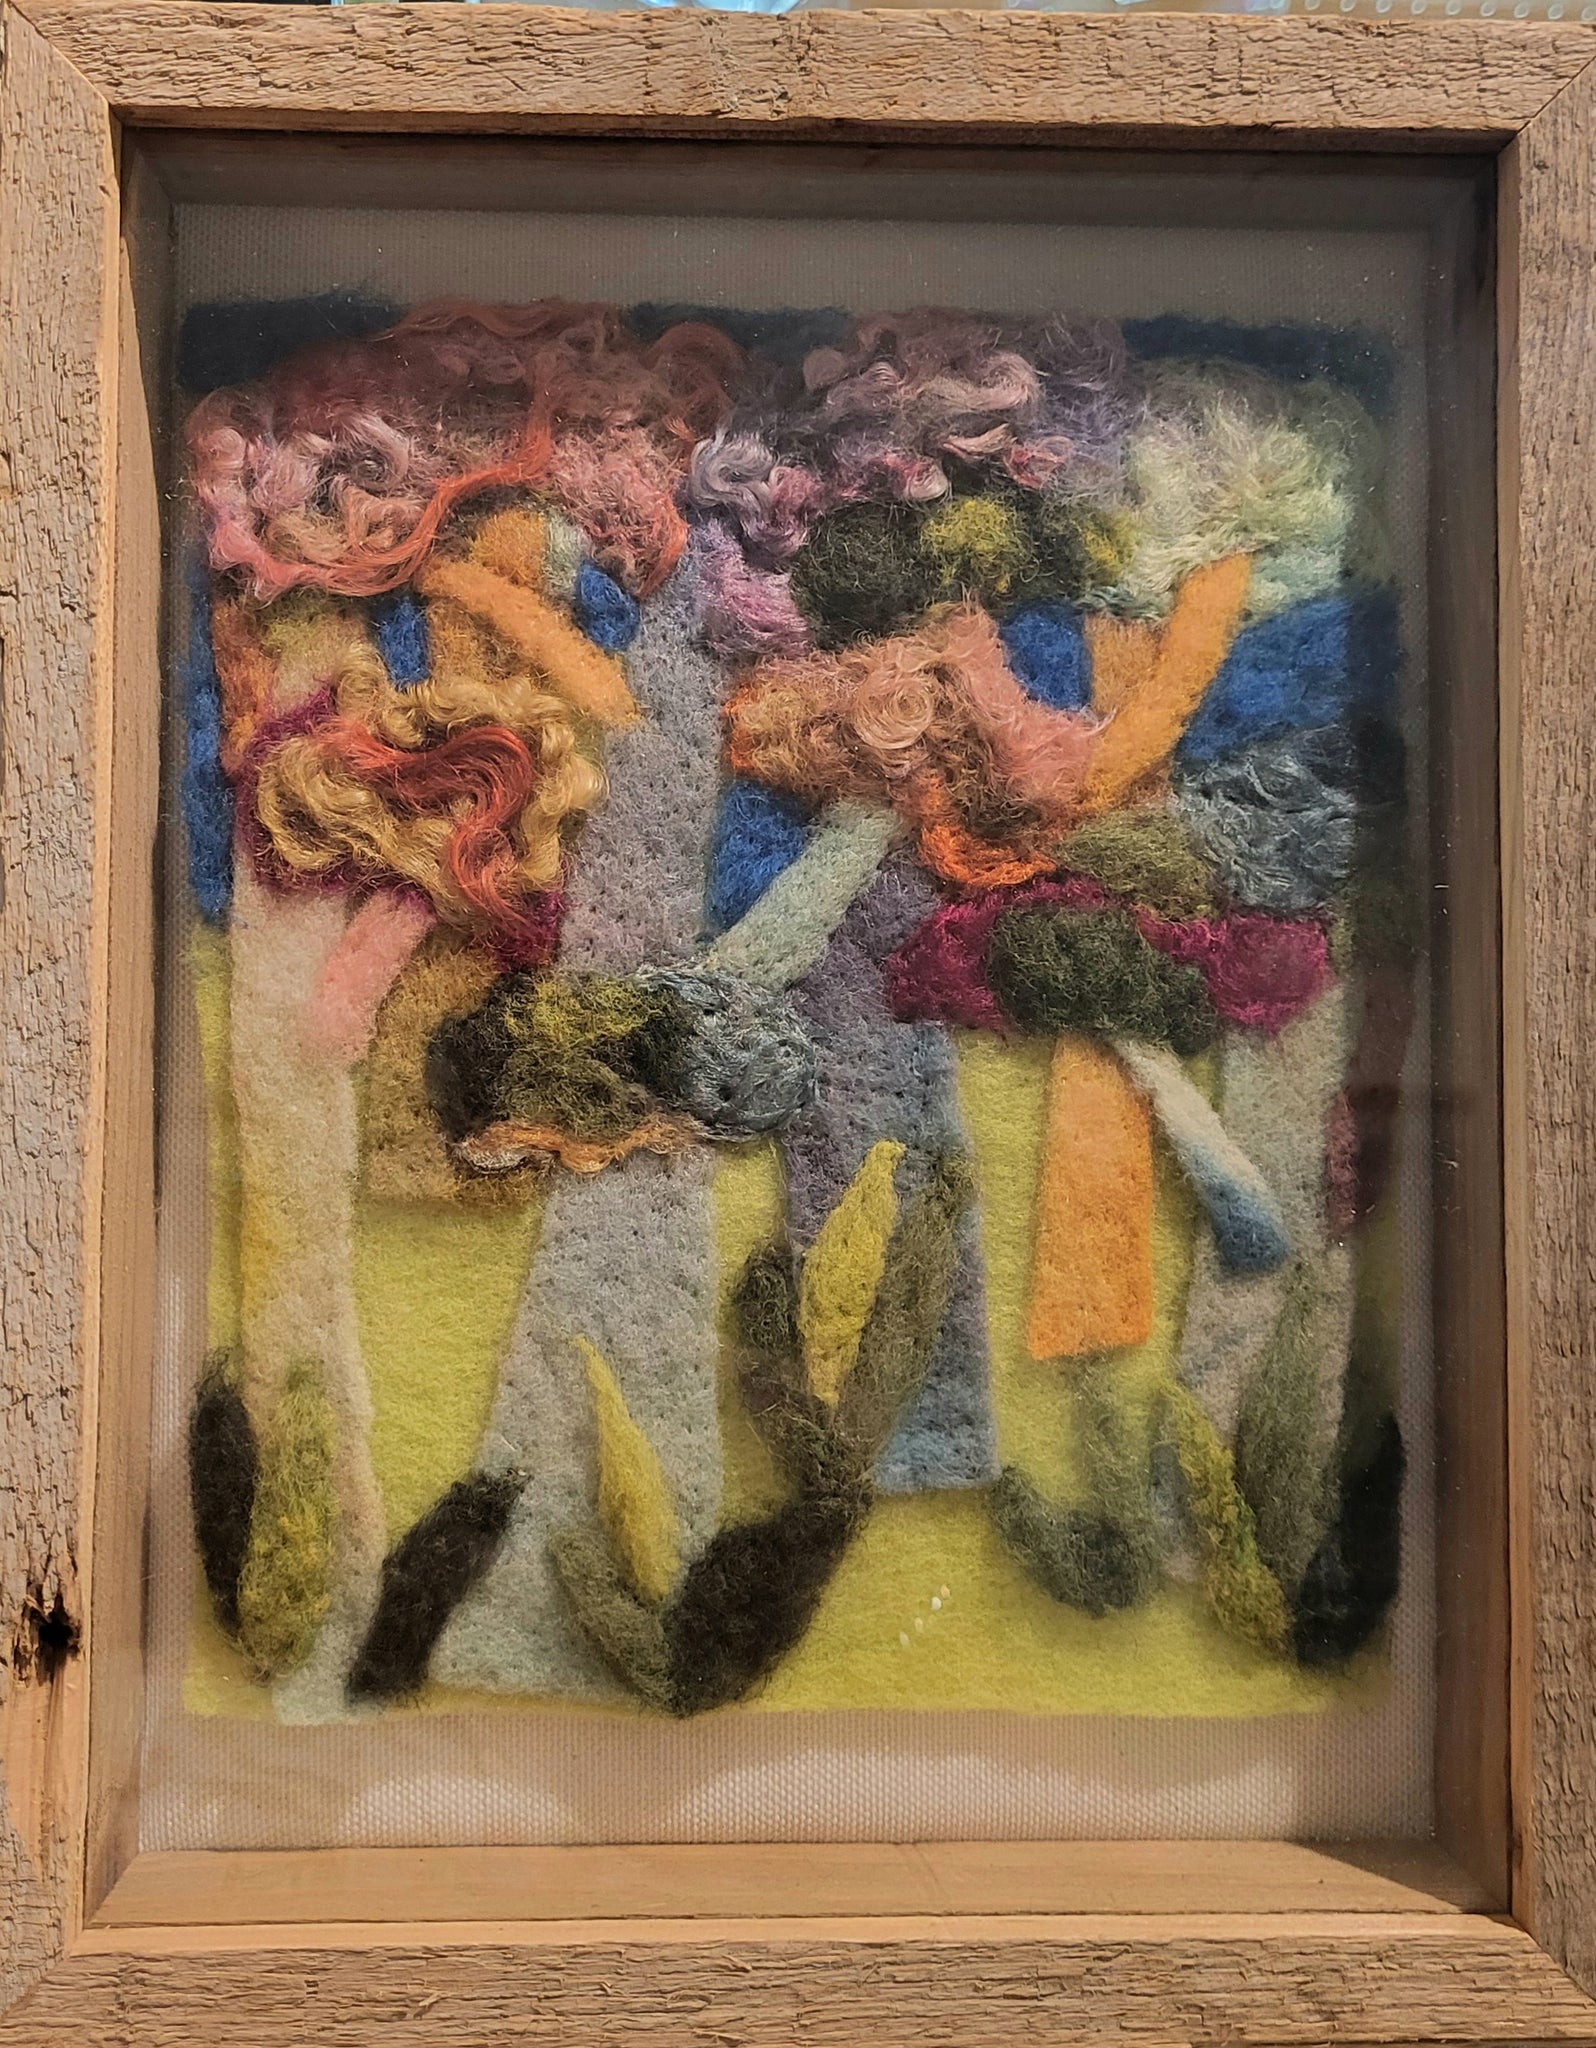 “Enchanted Forest" - 8 x 10 Original Felt Painting by Nicole Herbst